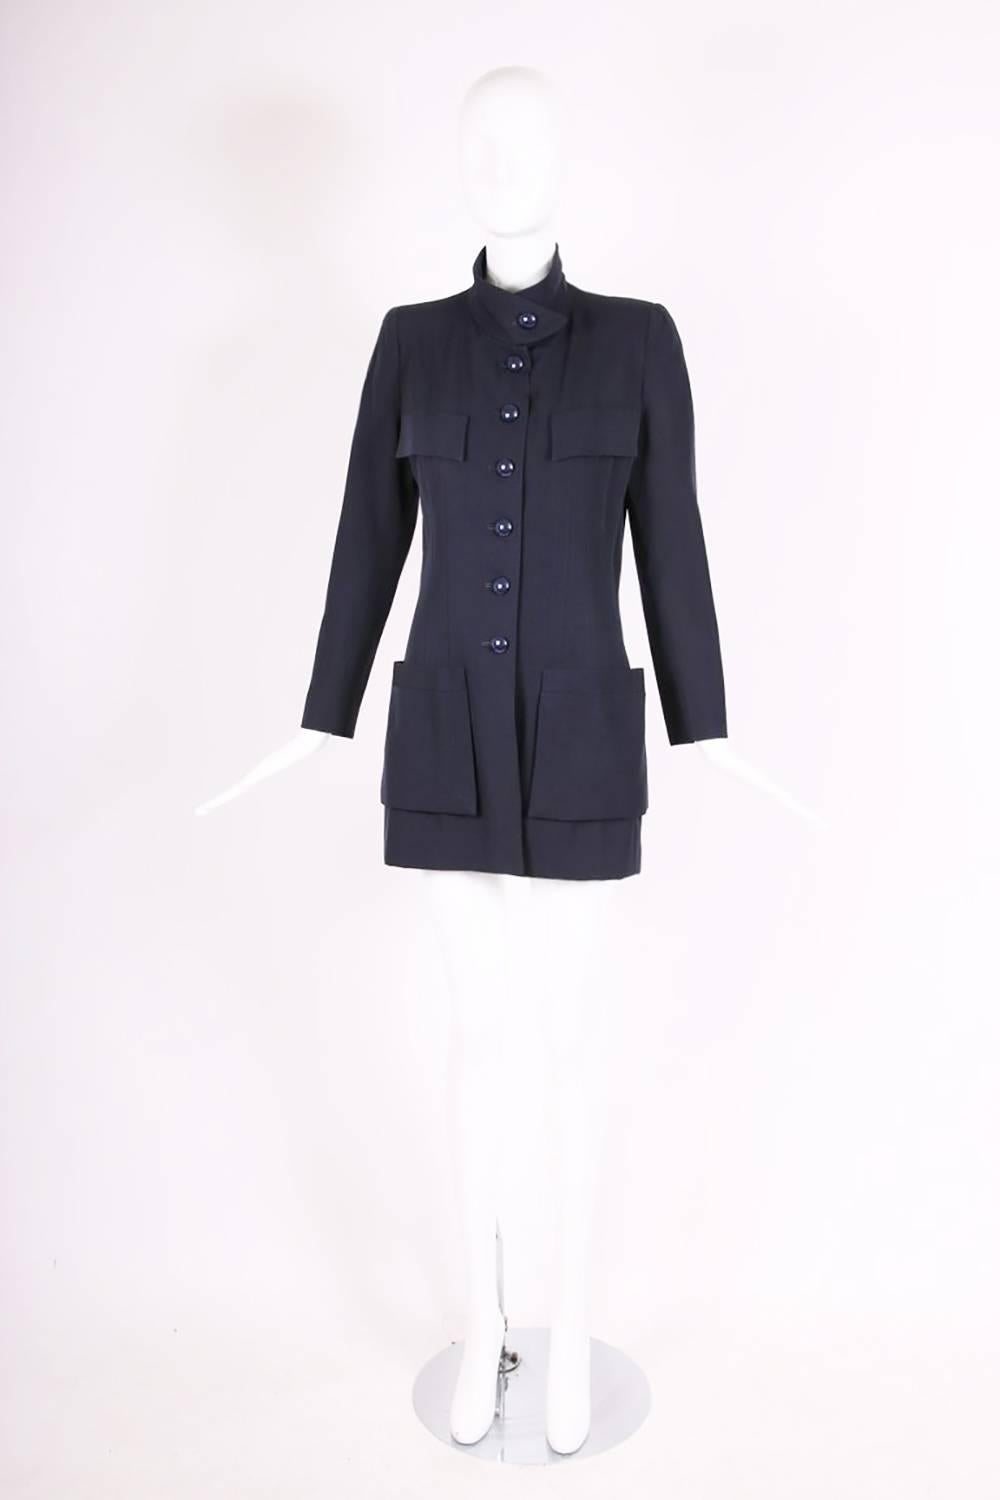 Black Chanel Haute Couture Navy Blue Wool Jacket and Skirt Ensemble No. 68181